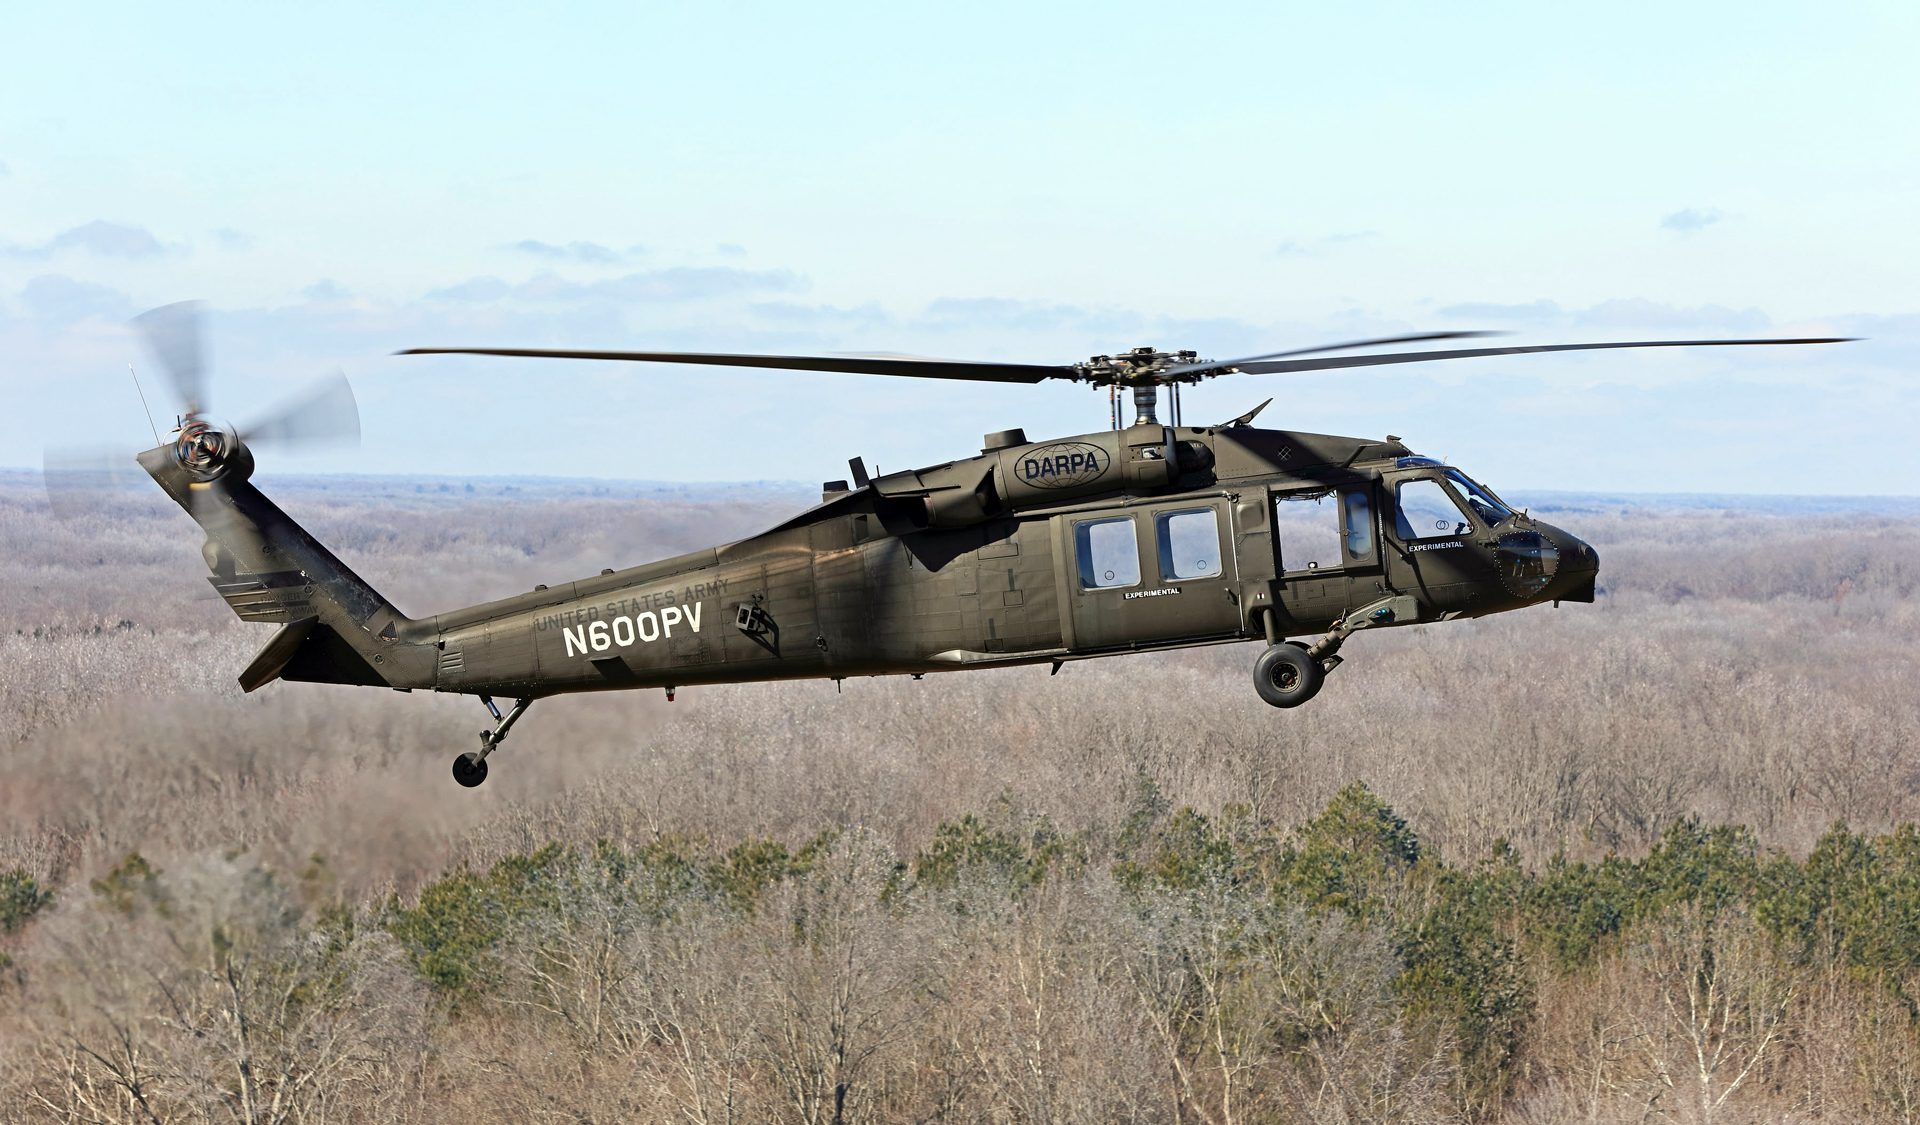 The unmanned Black Hawk